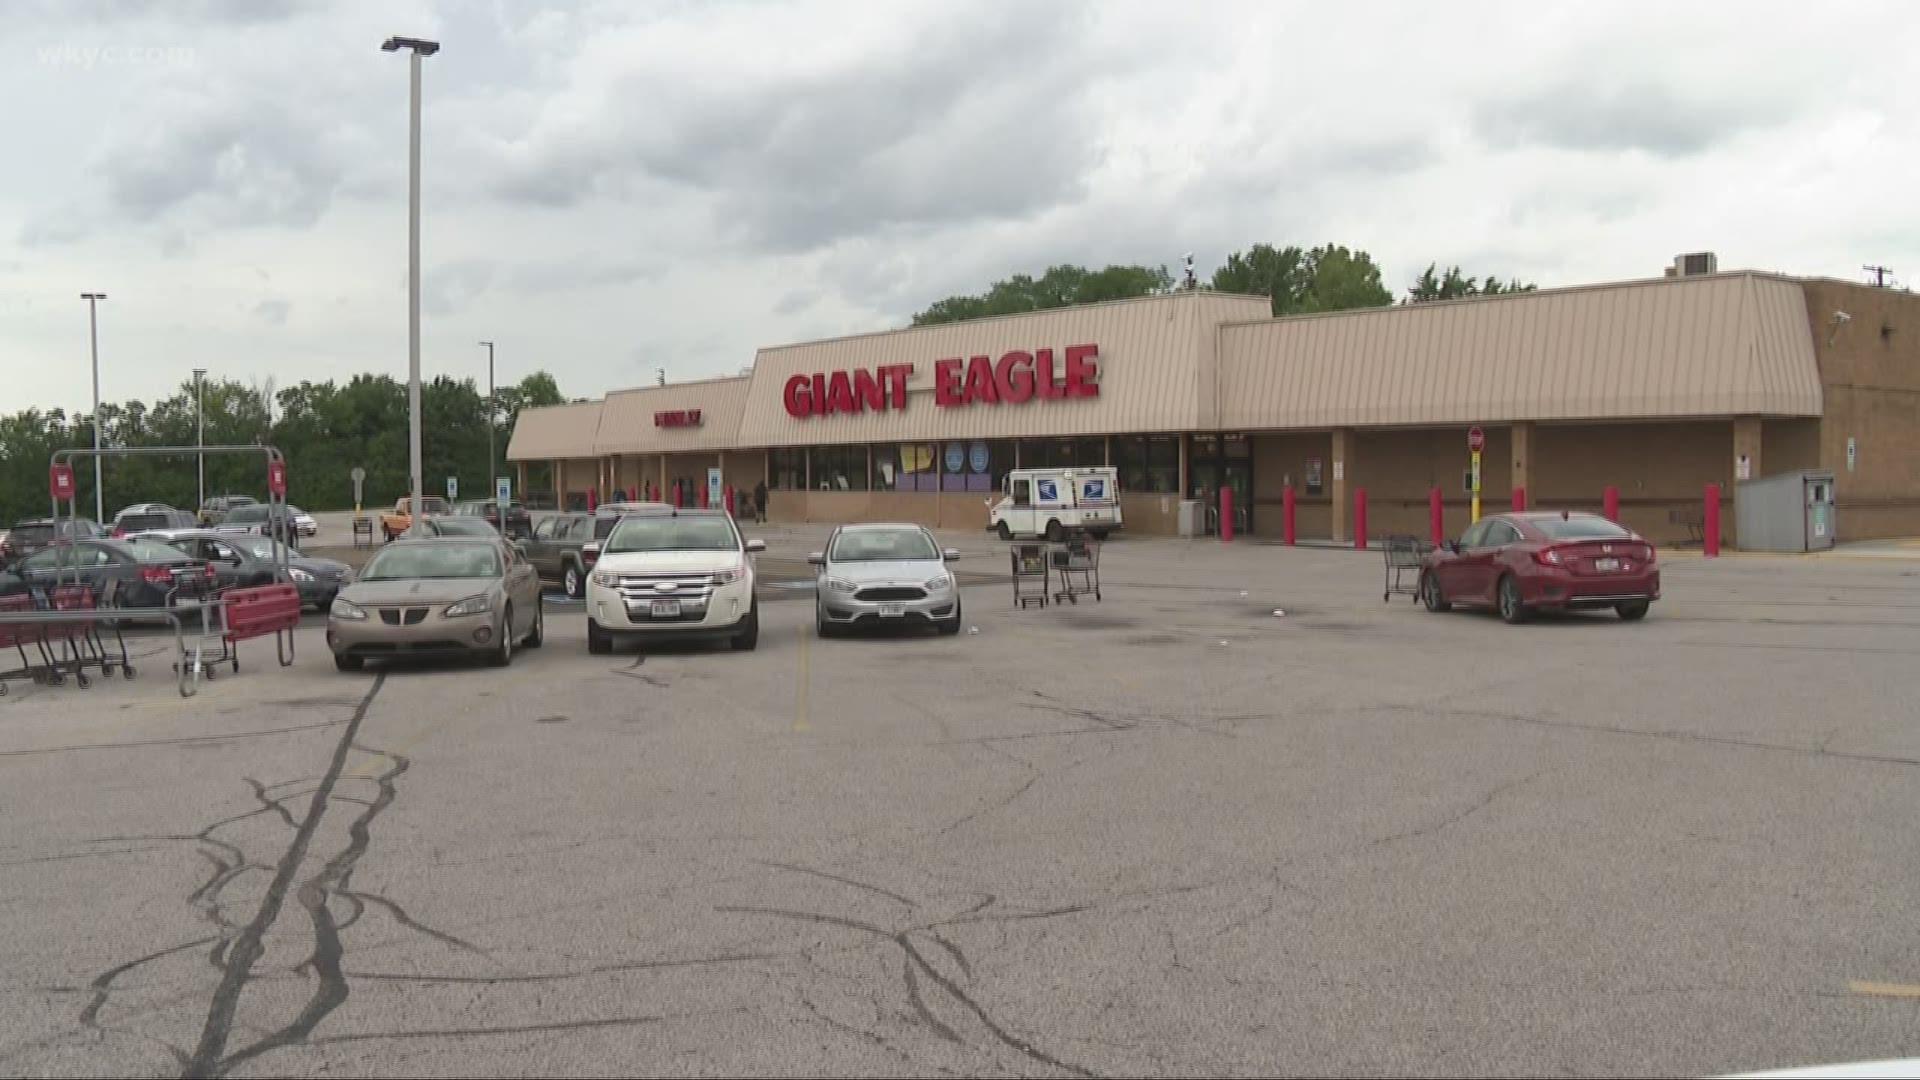 7 indicted in the biggest theft in Giant Eagle history